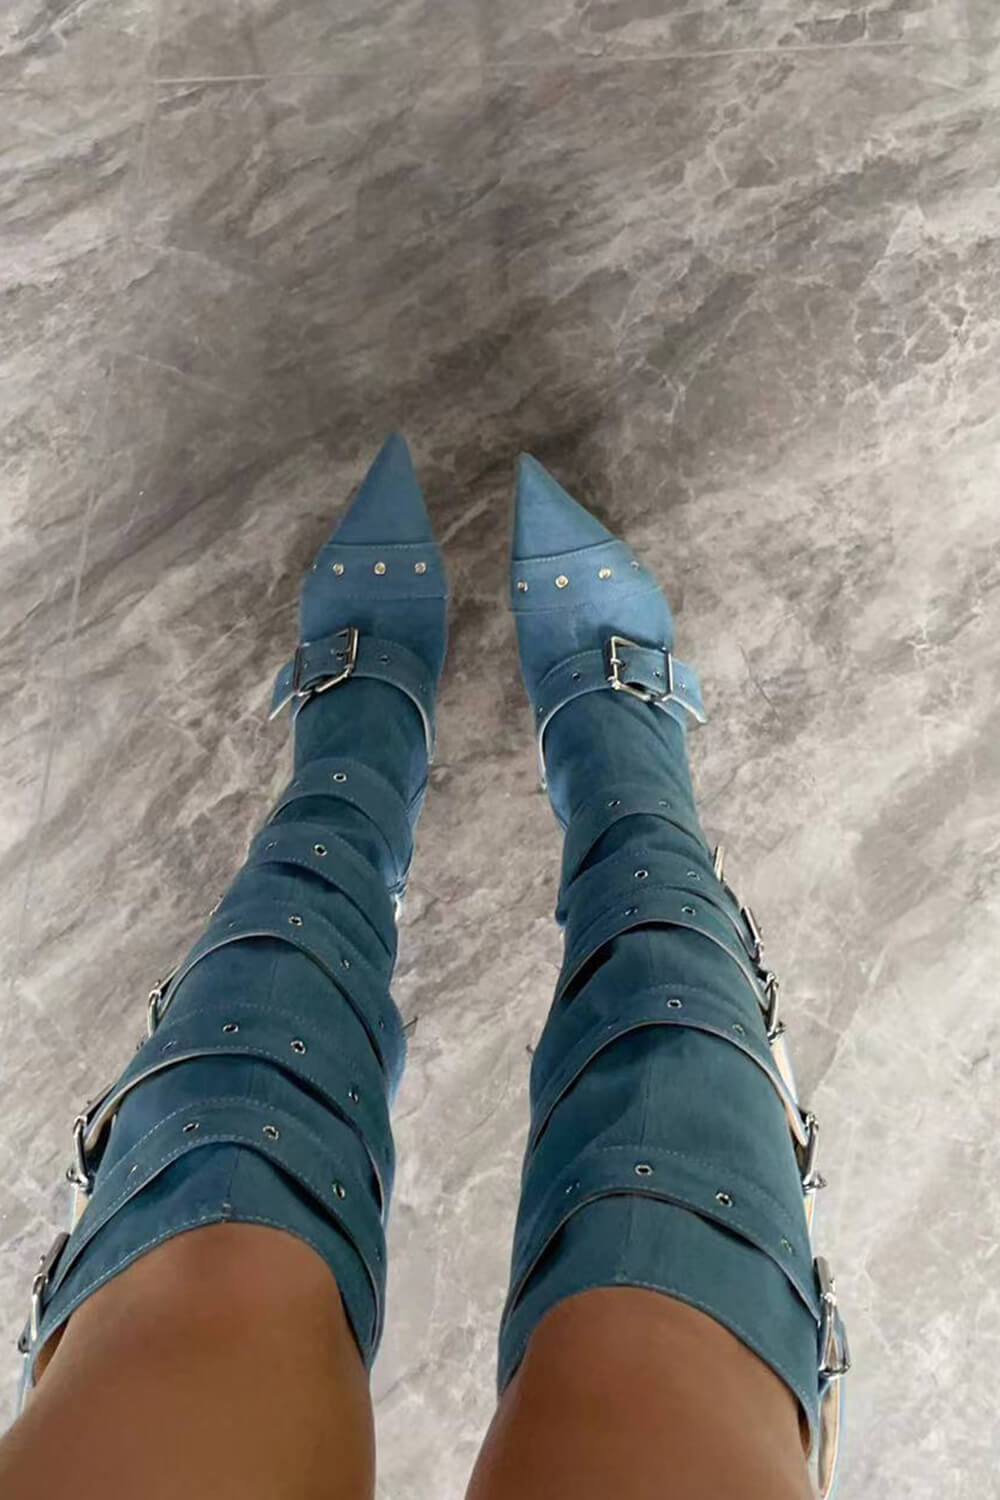 Blue Denim Strappy Buckle Pointed Toe Knee High Stiletto Boots